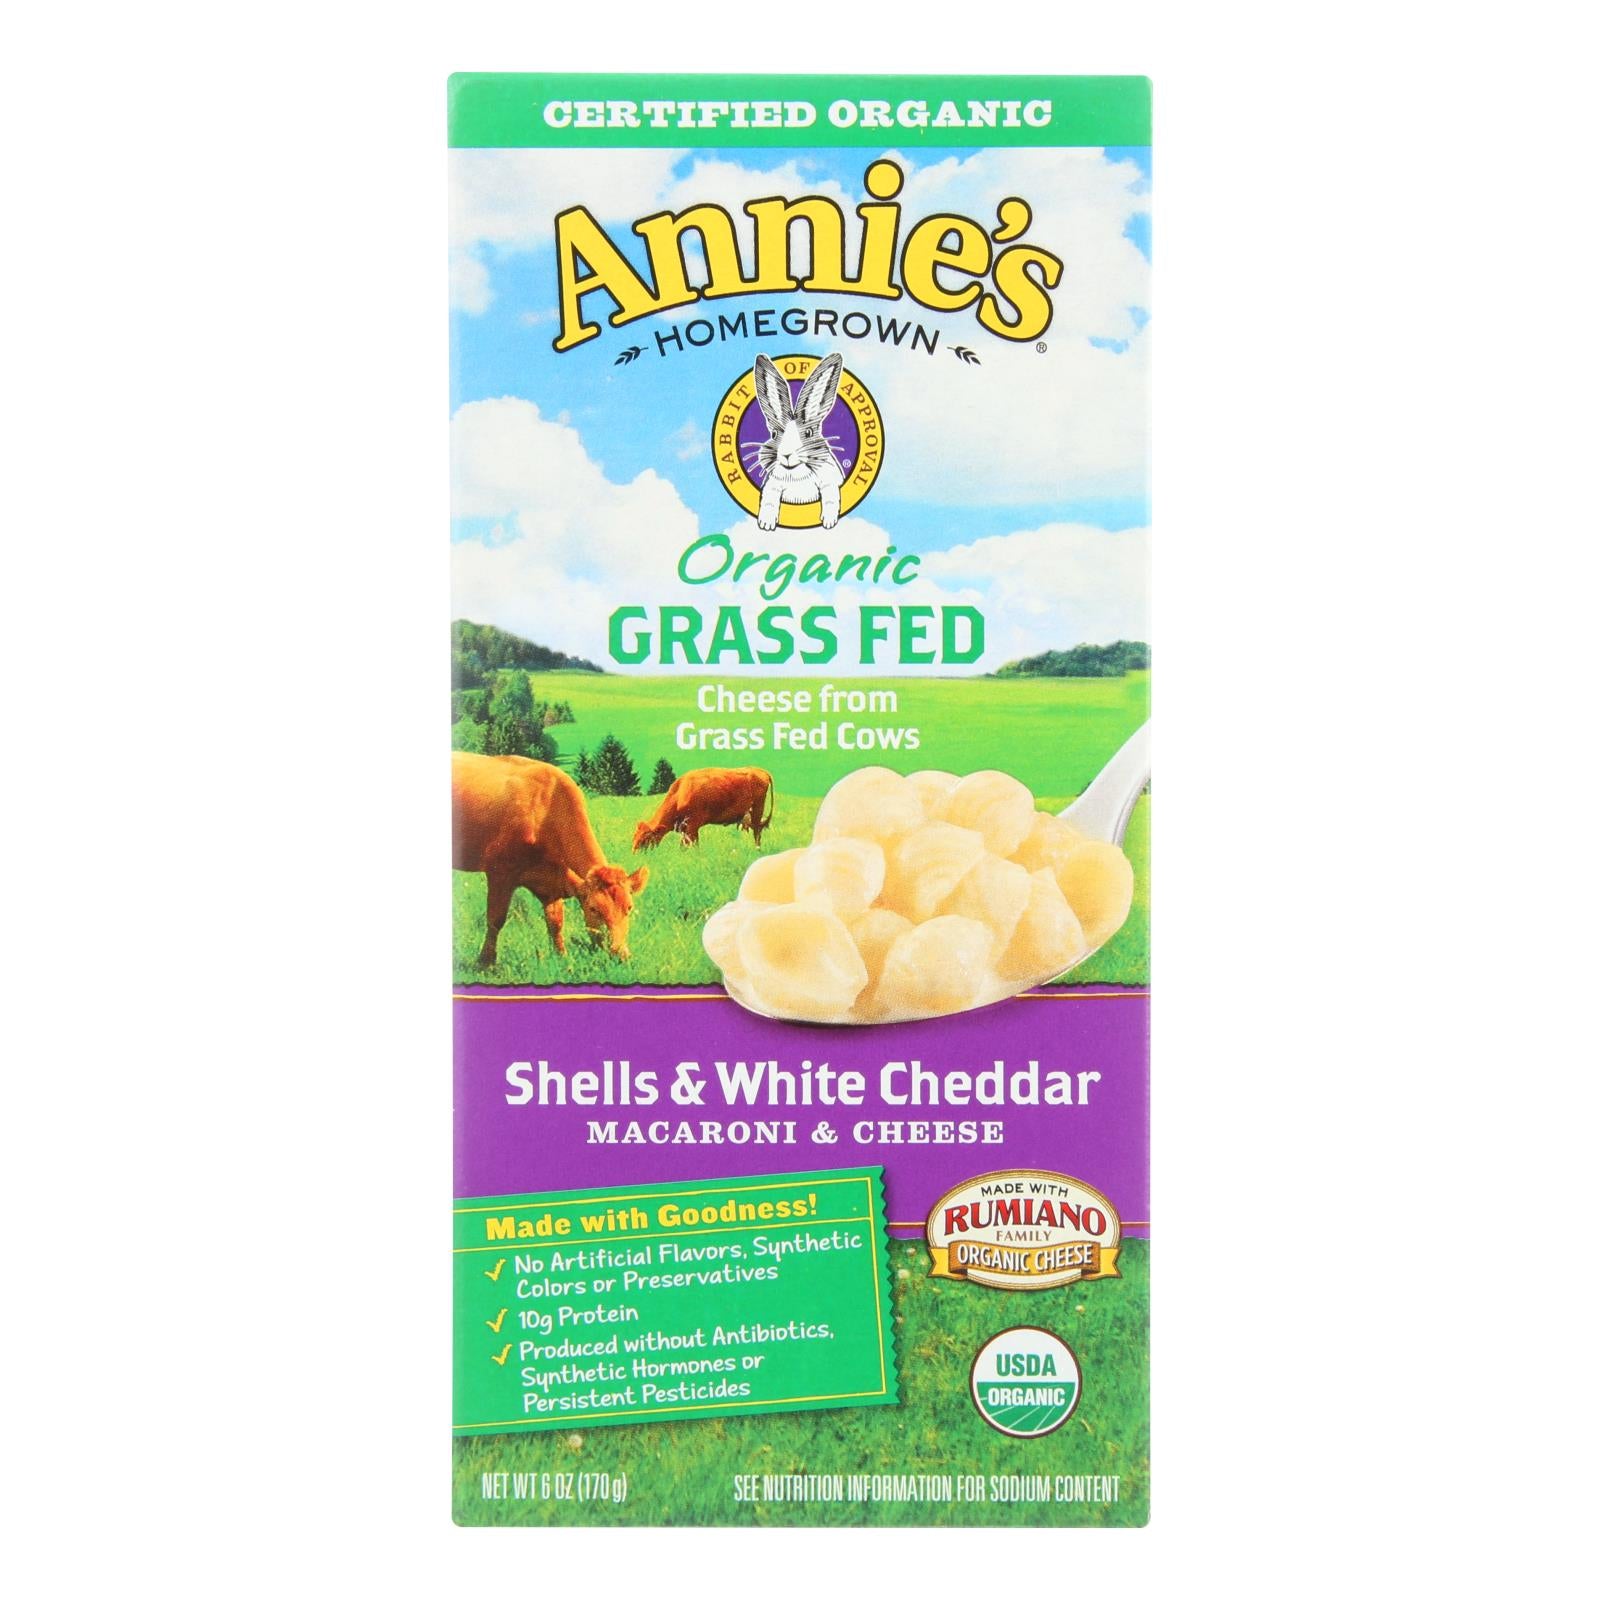 Annie'S Homegrown, Annies Homegrown Macaroni and Cheese - Organic - Grass Fed - Shells and White Cheddar - 6 oz - case of 12 (Pack of 12)